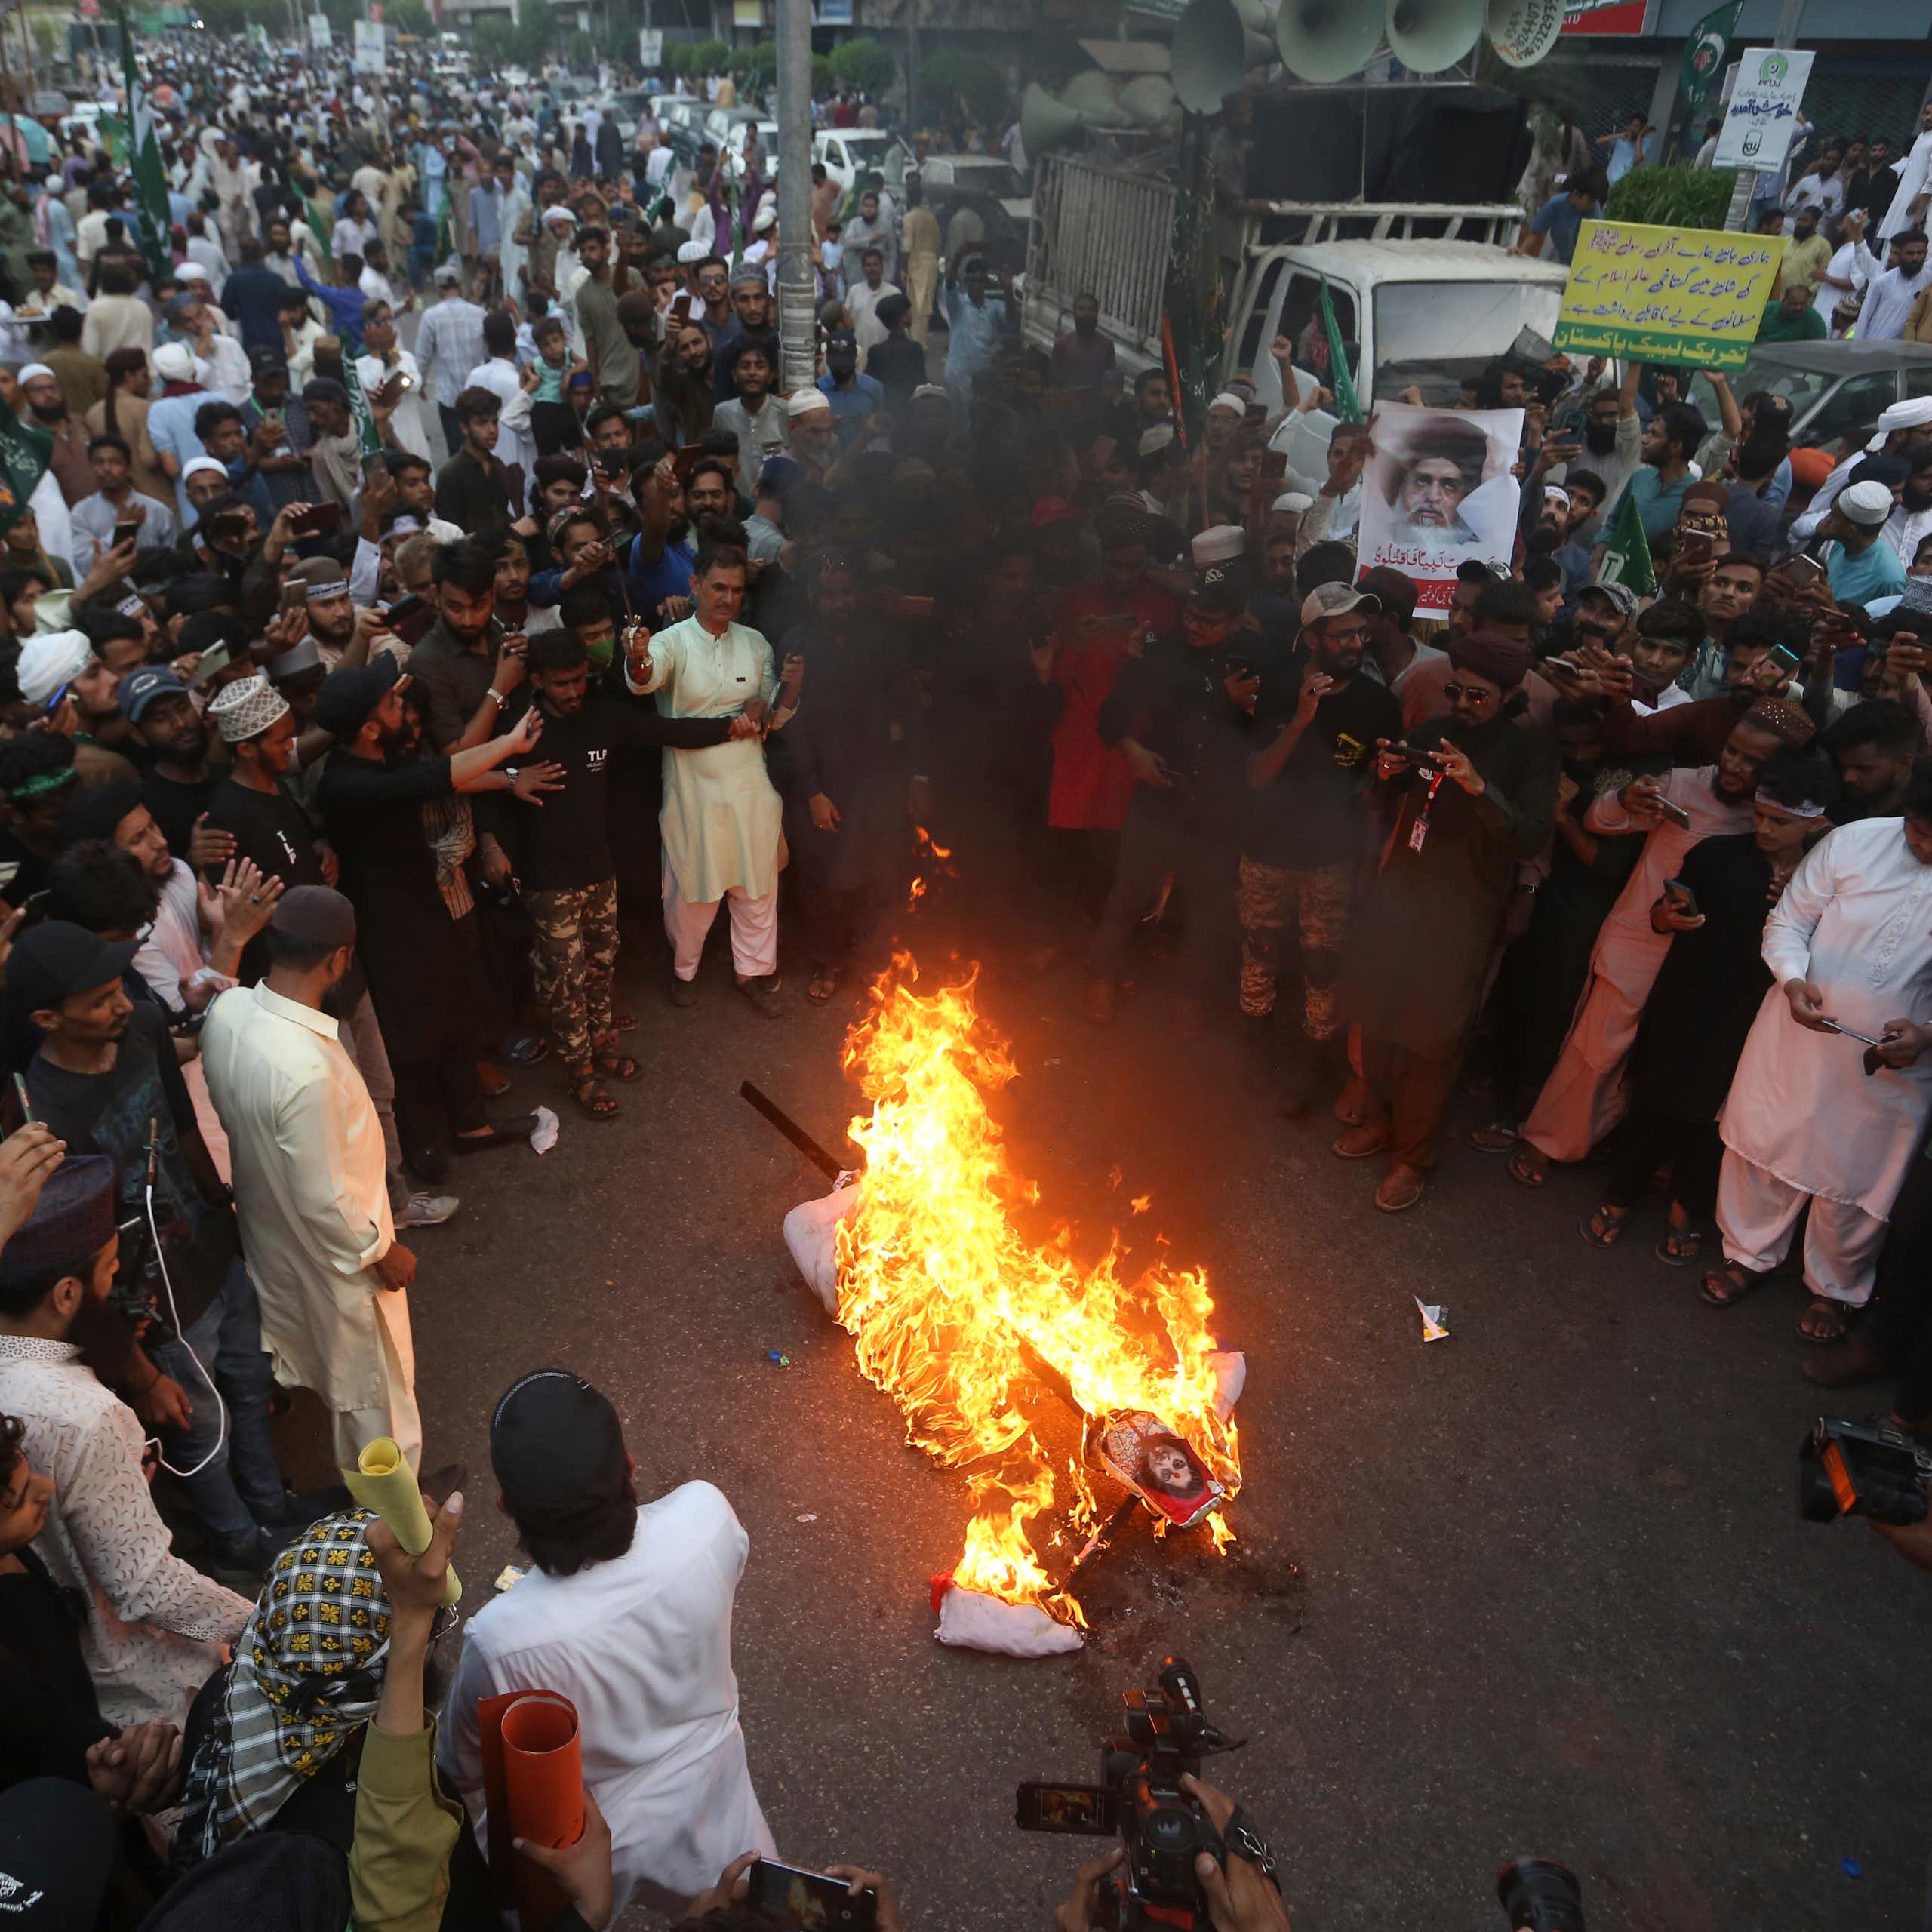 A large crowd gathers around a burning effigy during a demonstration.